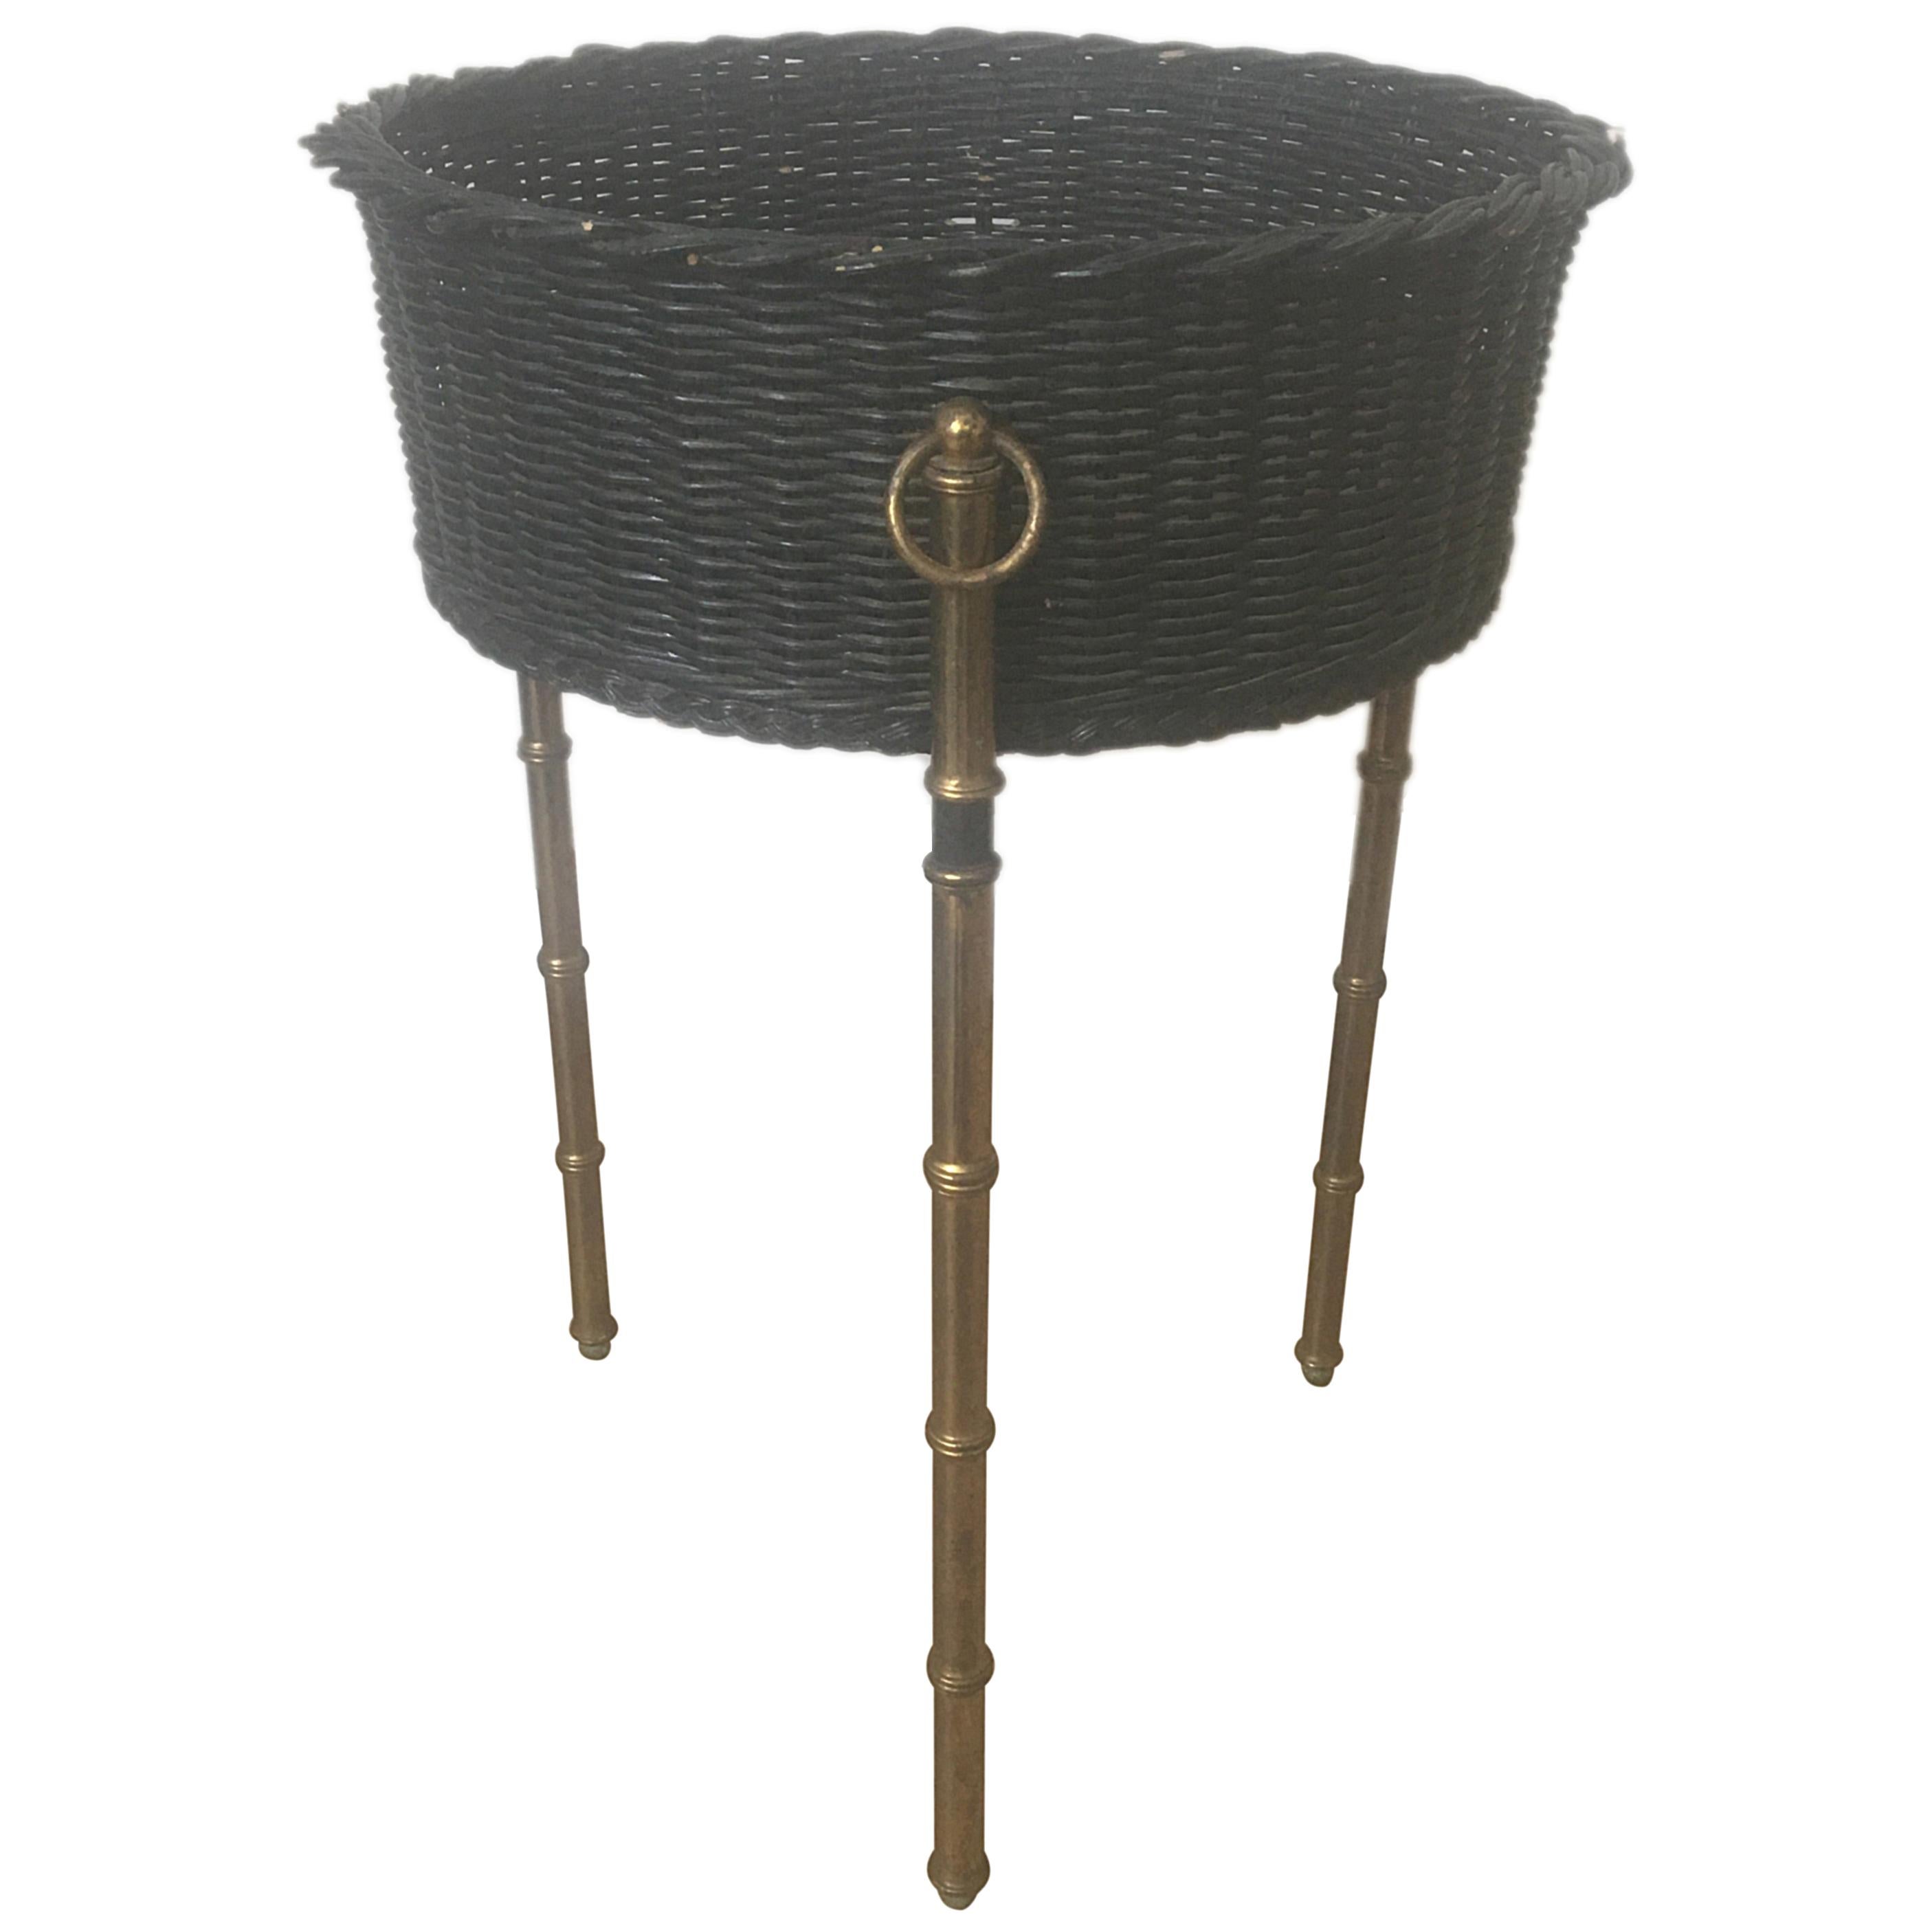  Jacques Adnet Black Rattan Indoor Planter, Bamboo Gilt Metal Legs, French 1950s For Sale